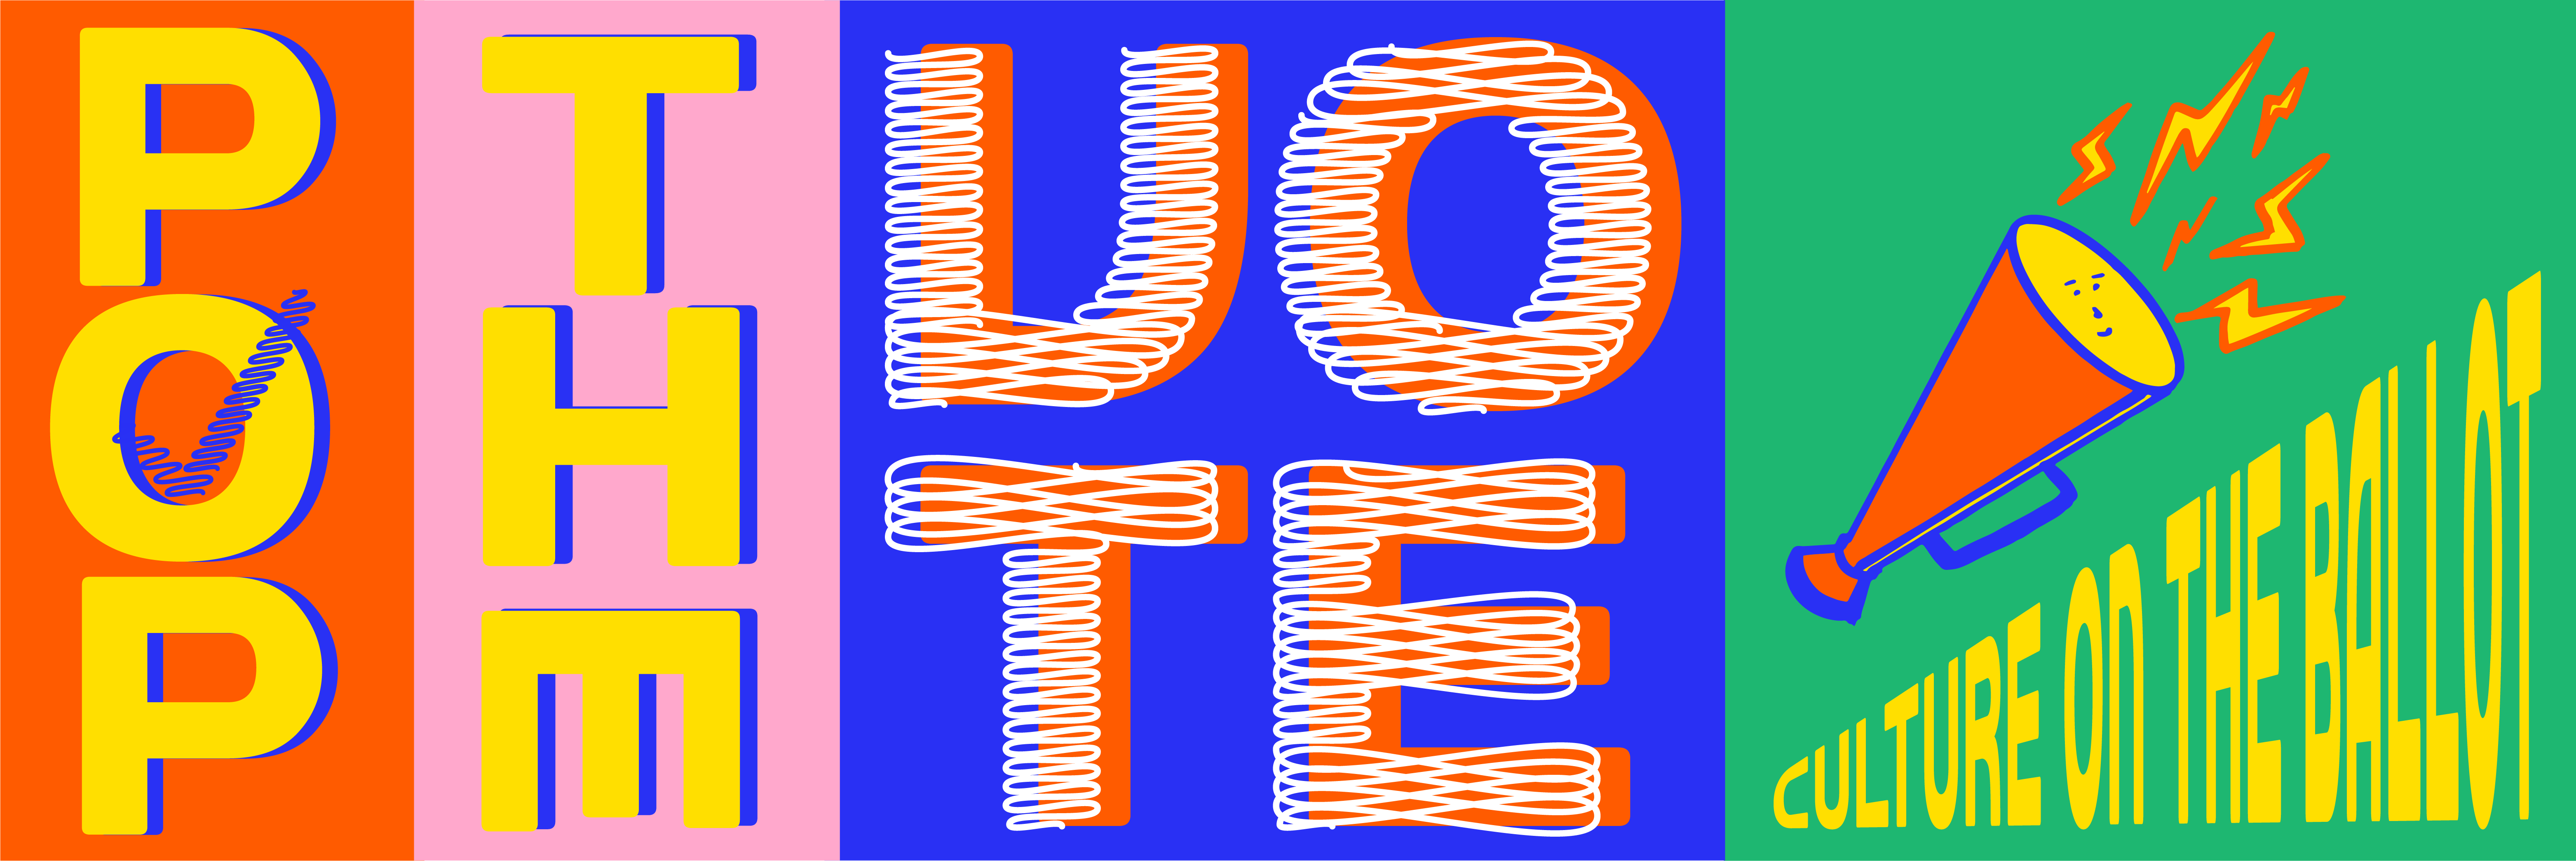 Pop the Vote! Culture on the Ballot